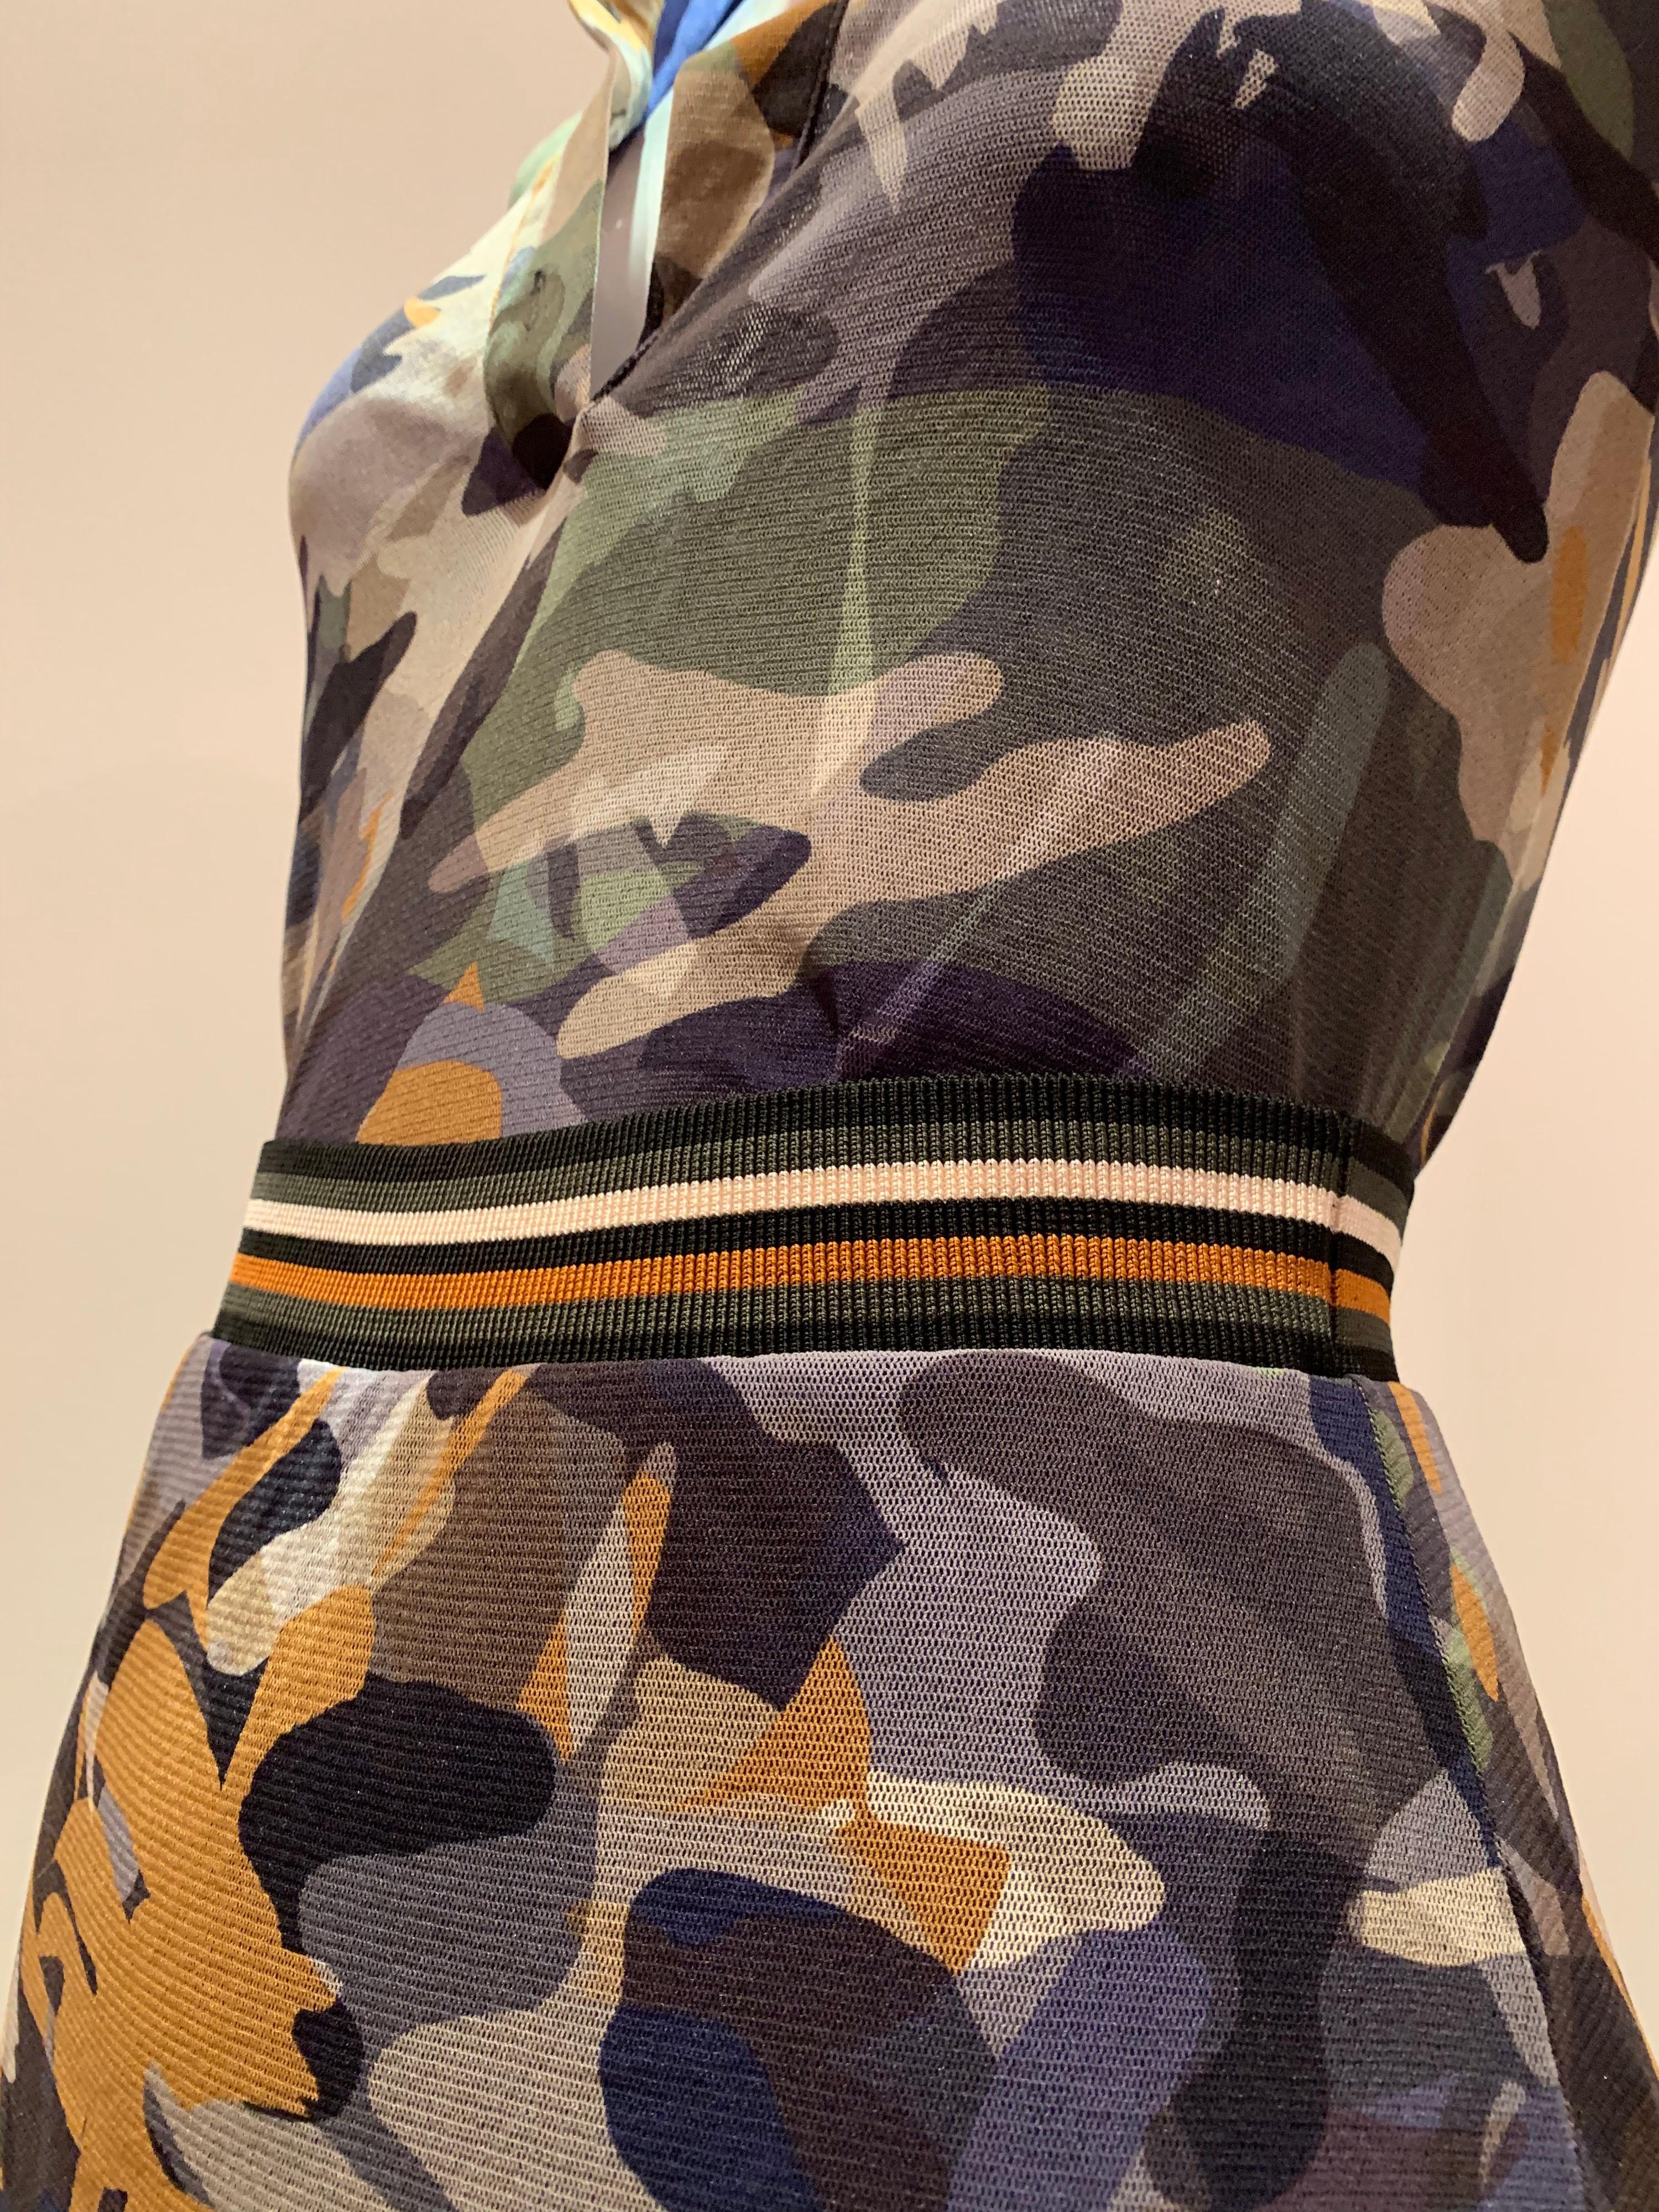 Fuzzi By Jean Paul Gaultier Stretch Tulle 2-Piece Blouse & Skirt In Camouflage  1